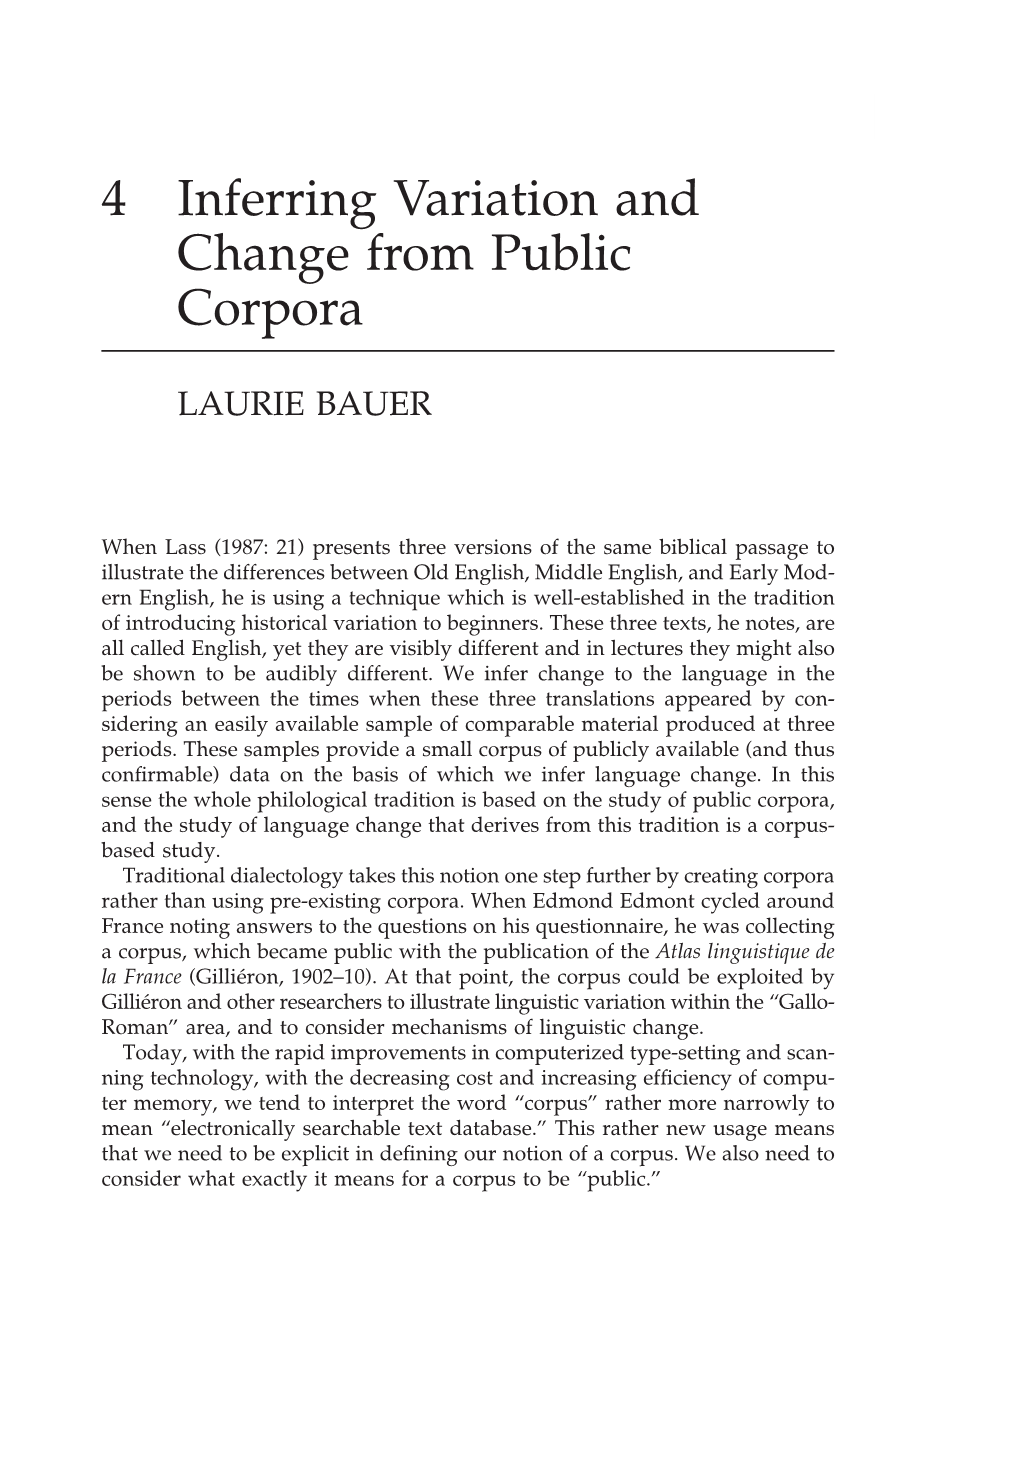 4 Inferring Variation and Change from Public Corpora